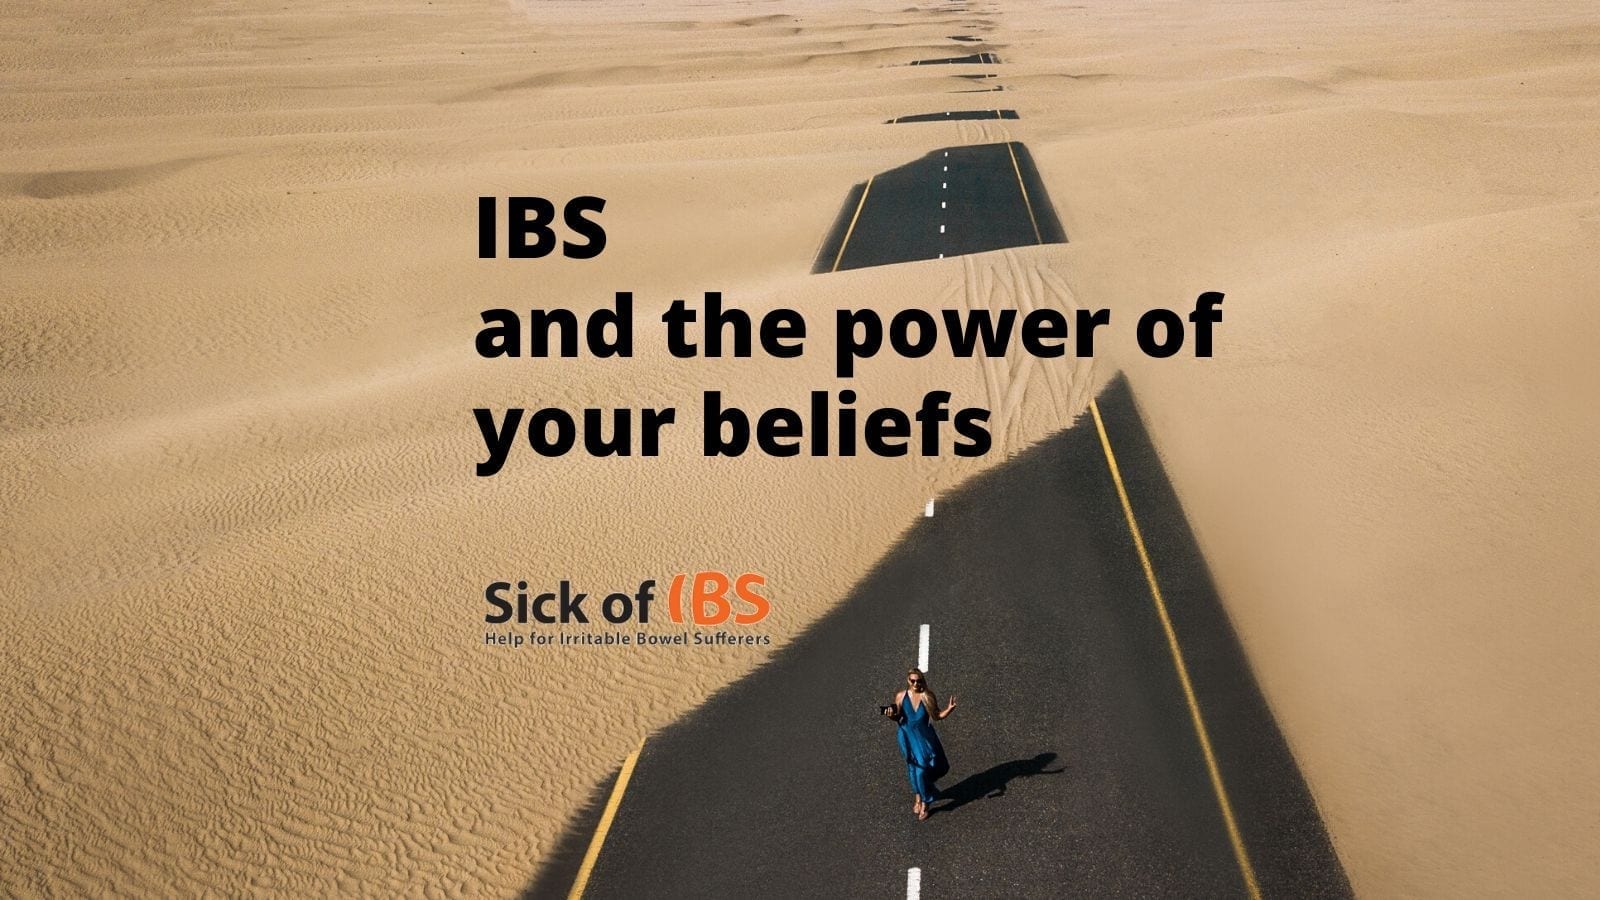 How beliefs can impact your IBS and recovery